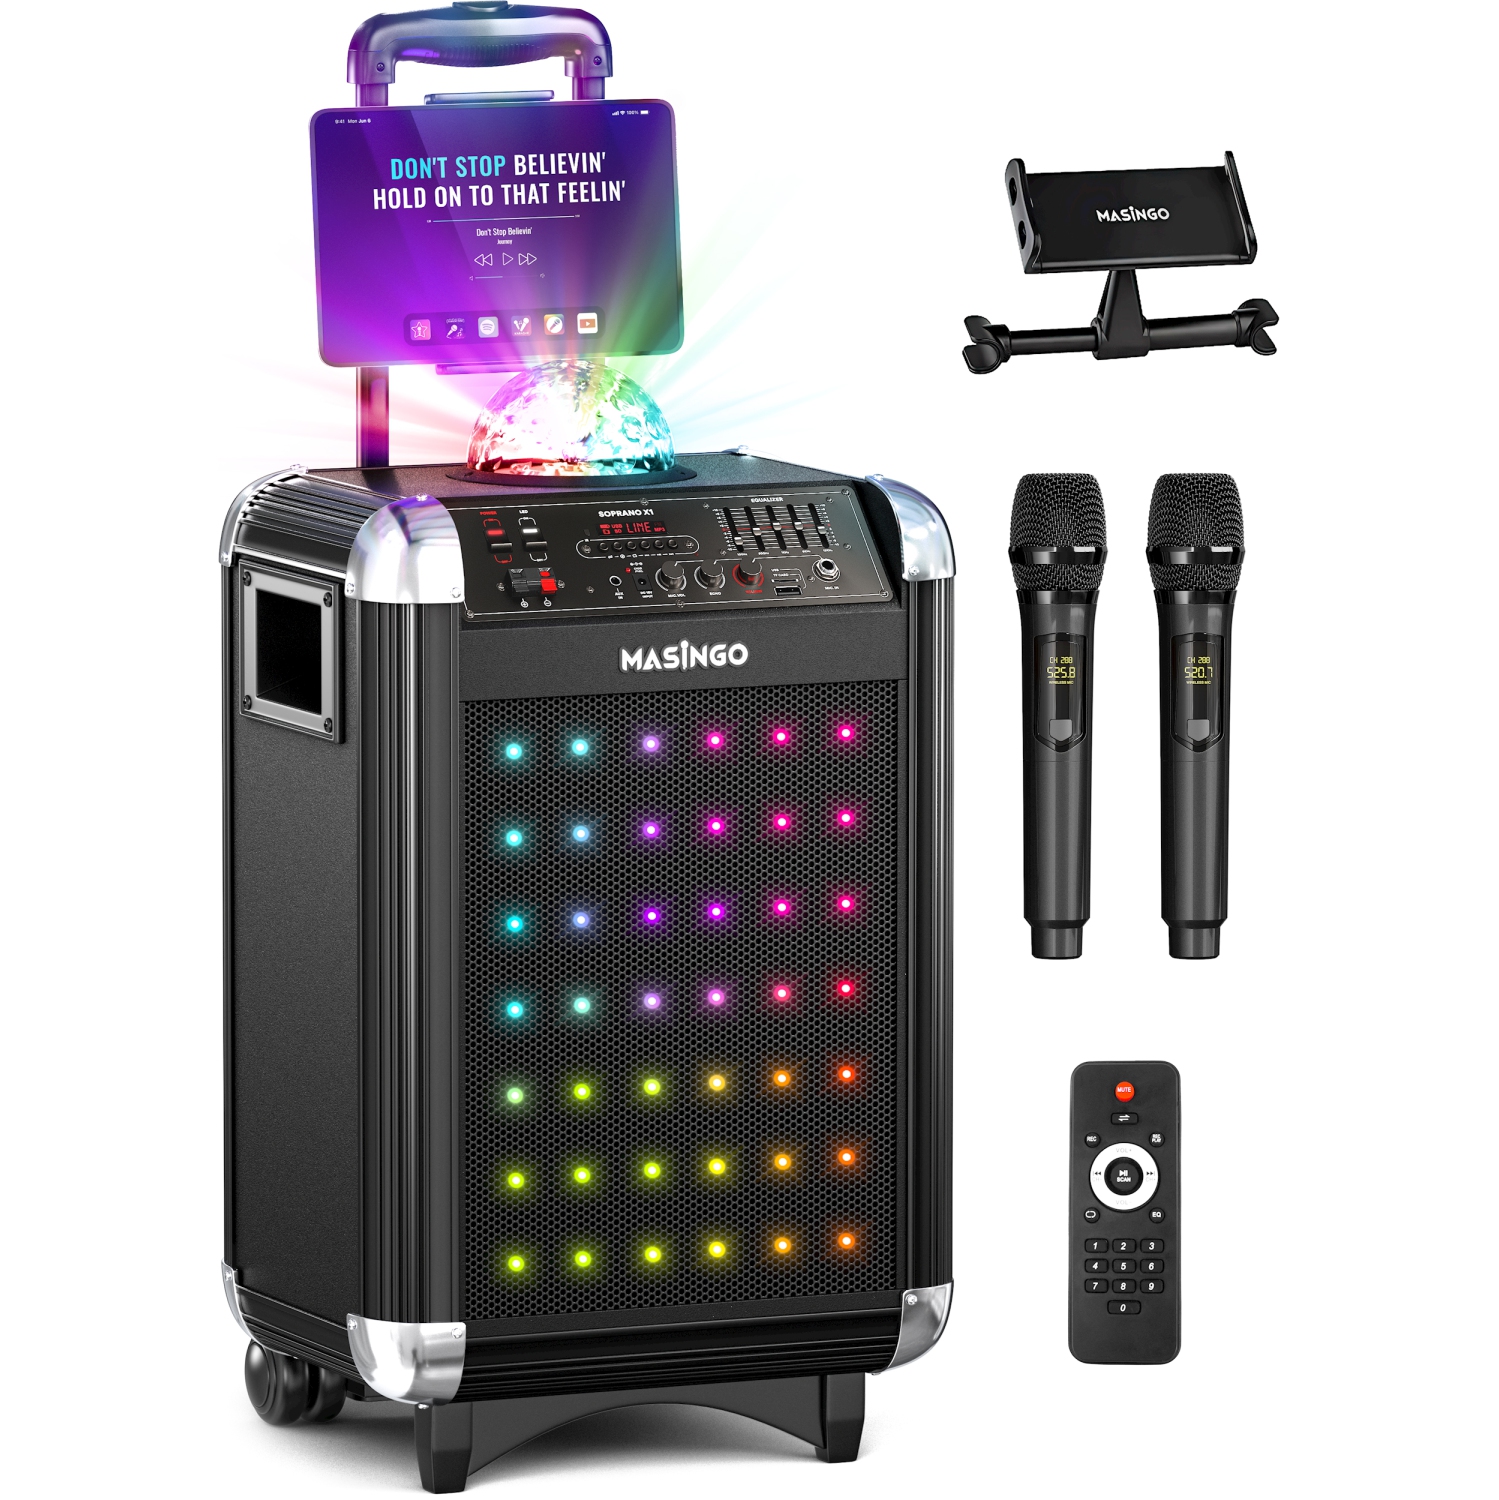 MASINGO Karaoke Machine for Adults & Kids with 2 Wireless Microphones - Portable PA Speaker System w/Two Bluetooth Mics, Party Lights, Lyrics Display Holder & TV Cable - Soprano X1